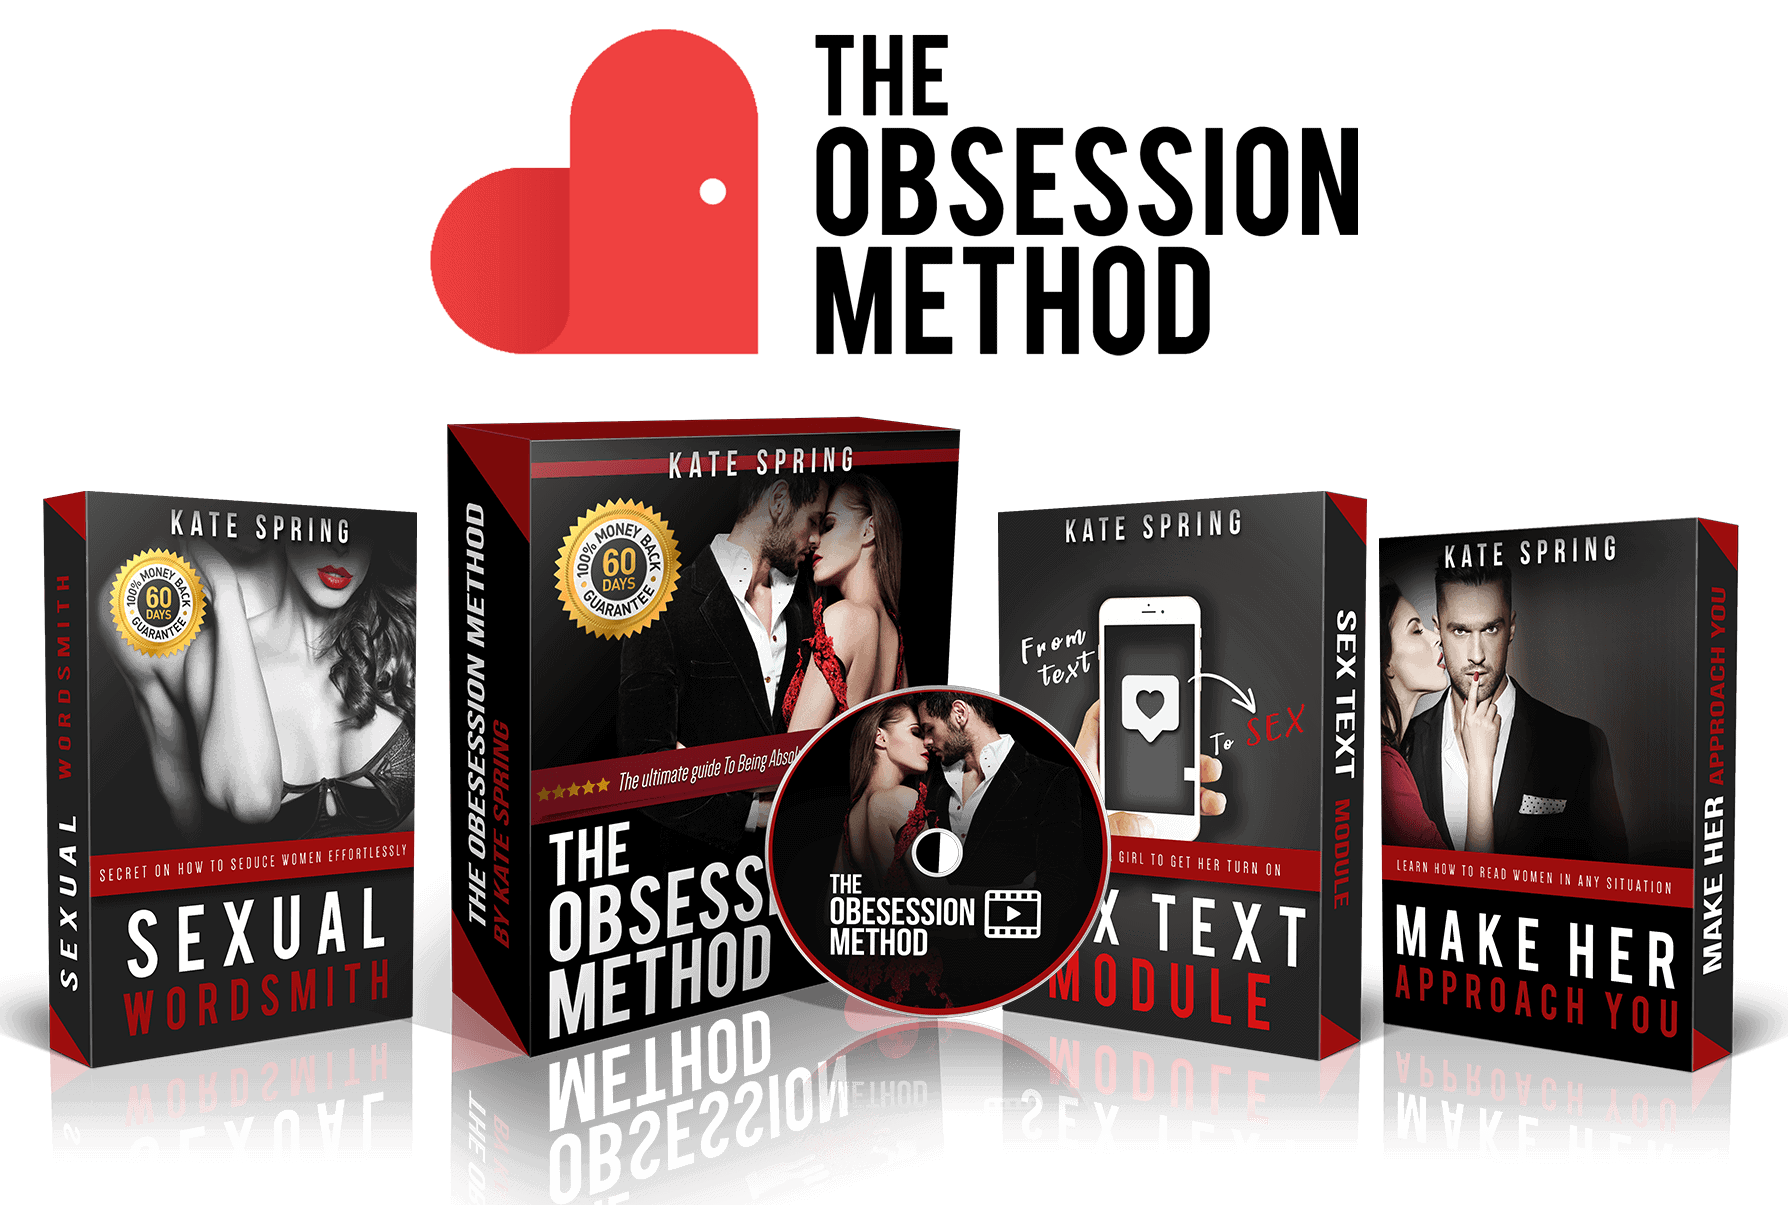 The obsession Method